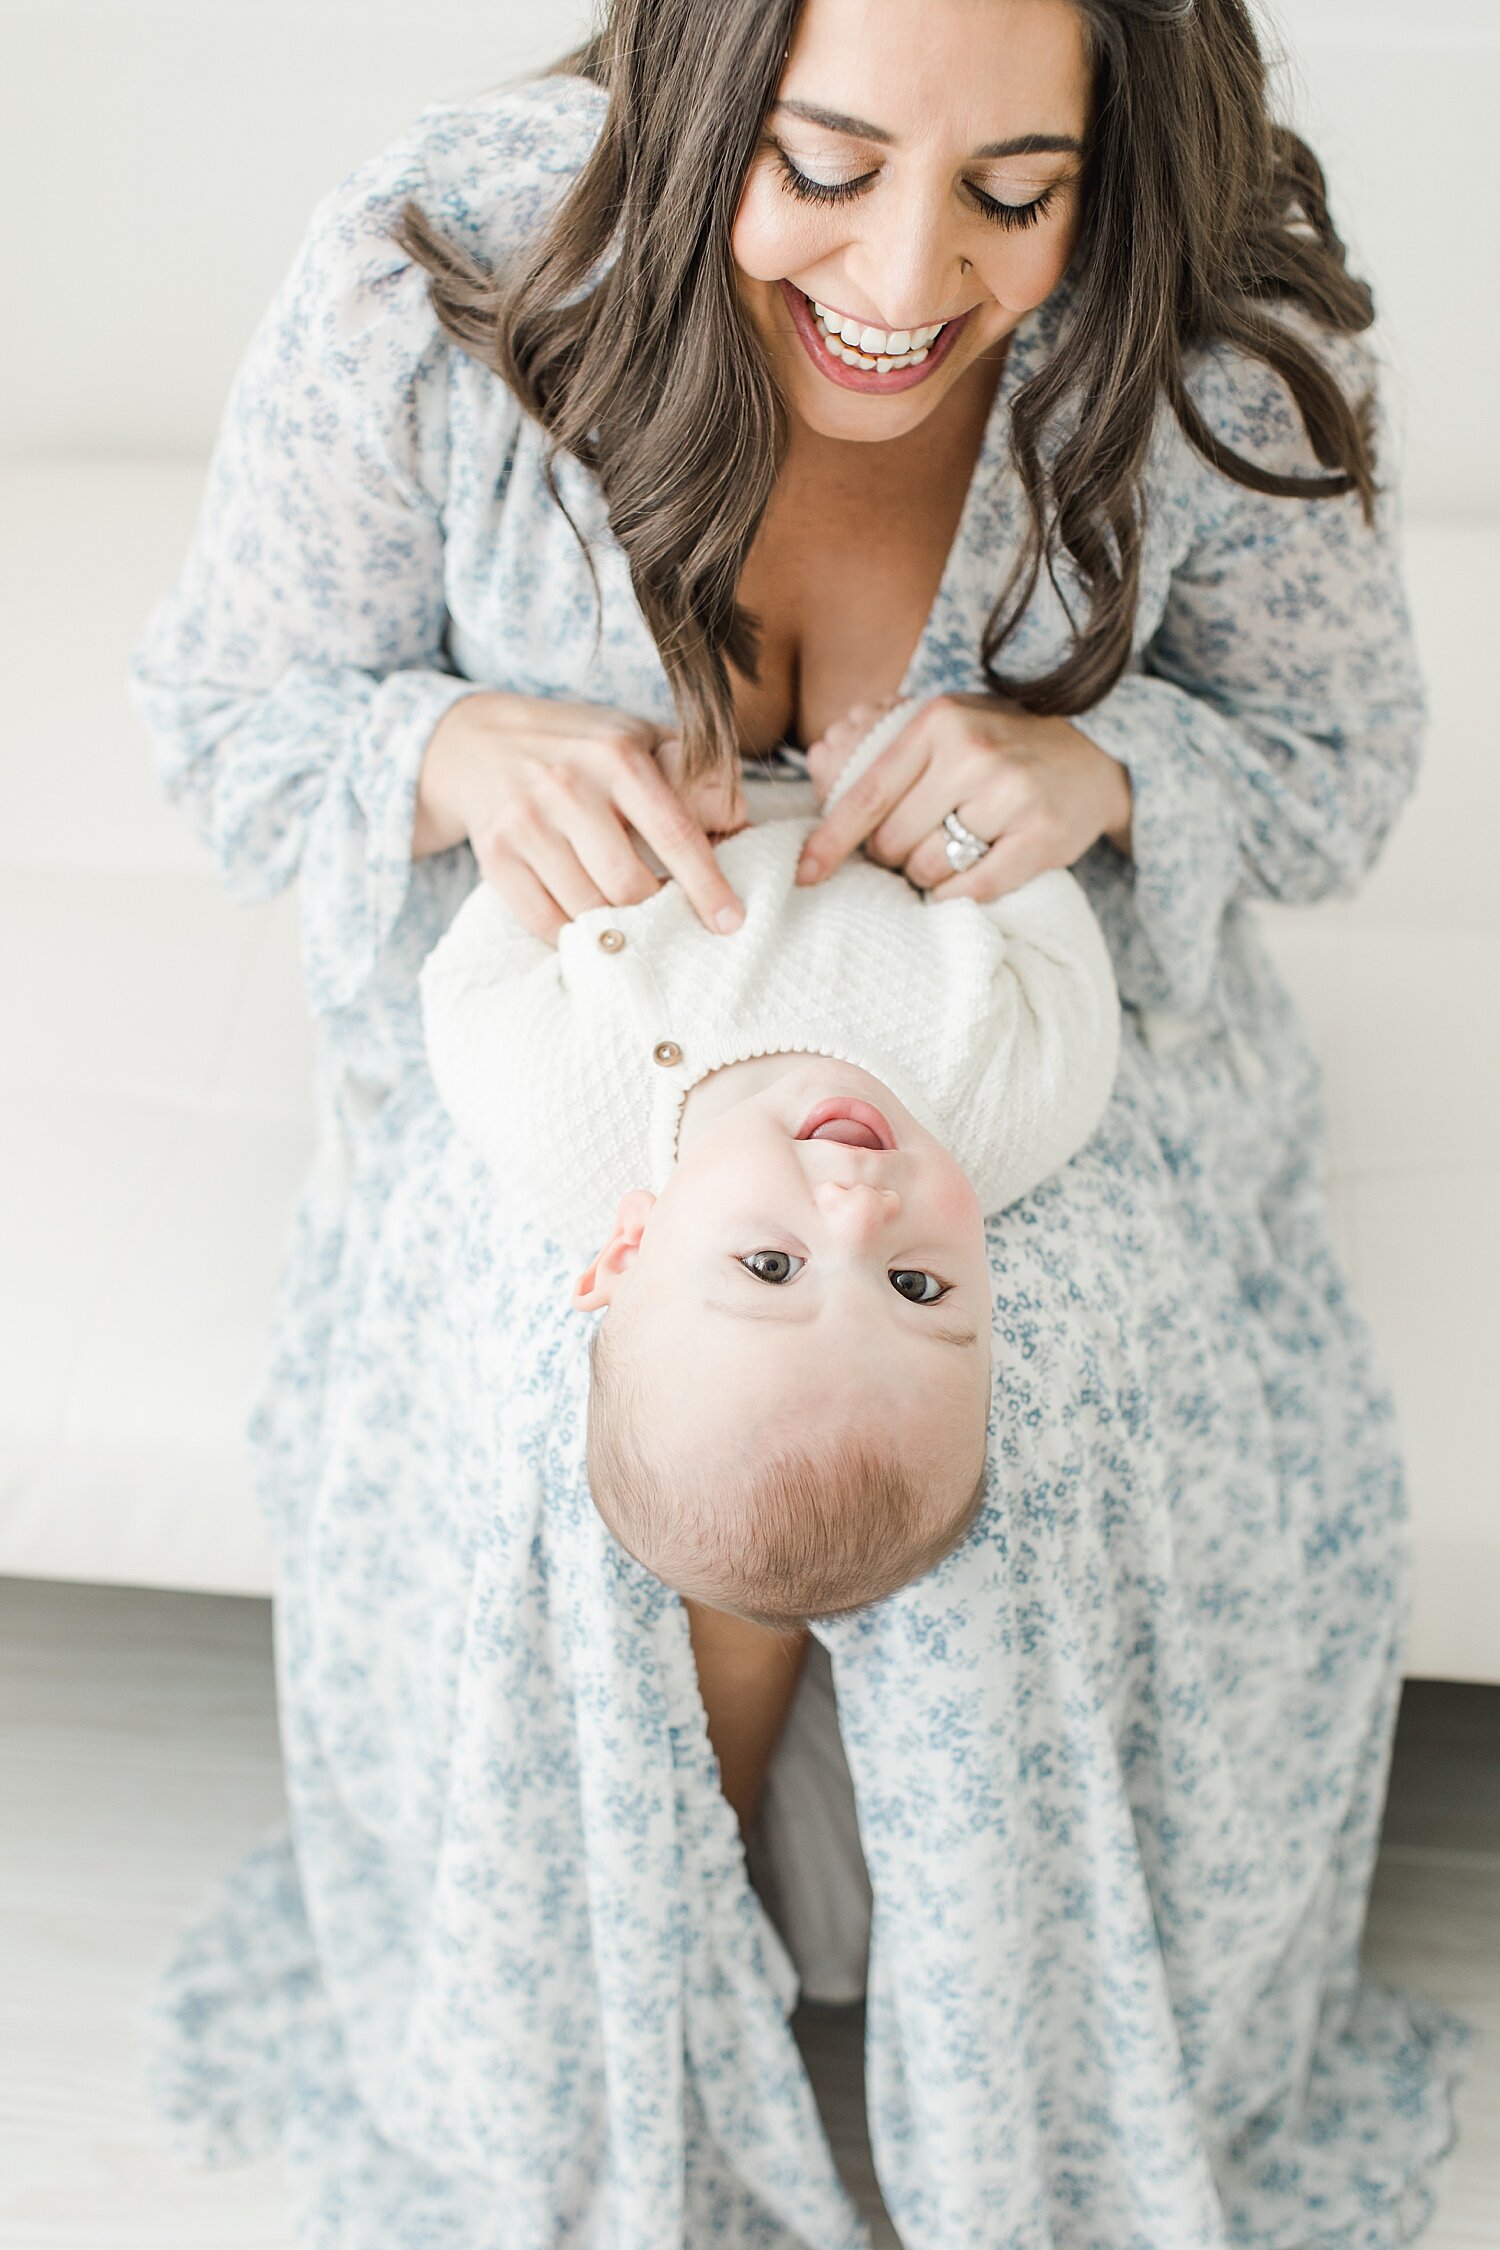 Mom and baby boy laughing together. Photos by Kristin Wood Photography.